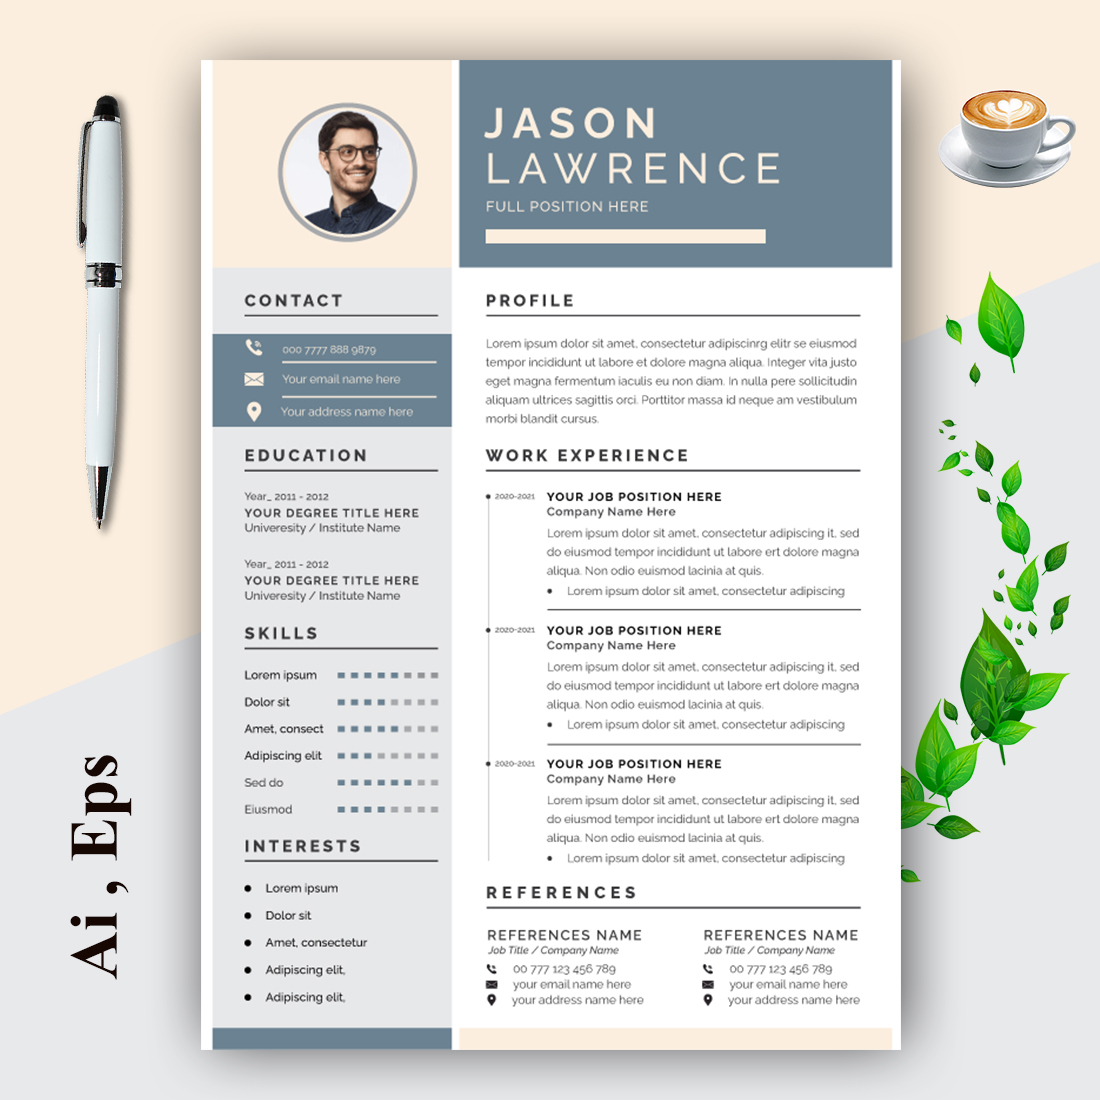 Clean Resume Layout with Cover Letter cover image.